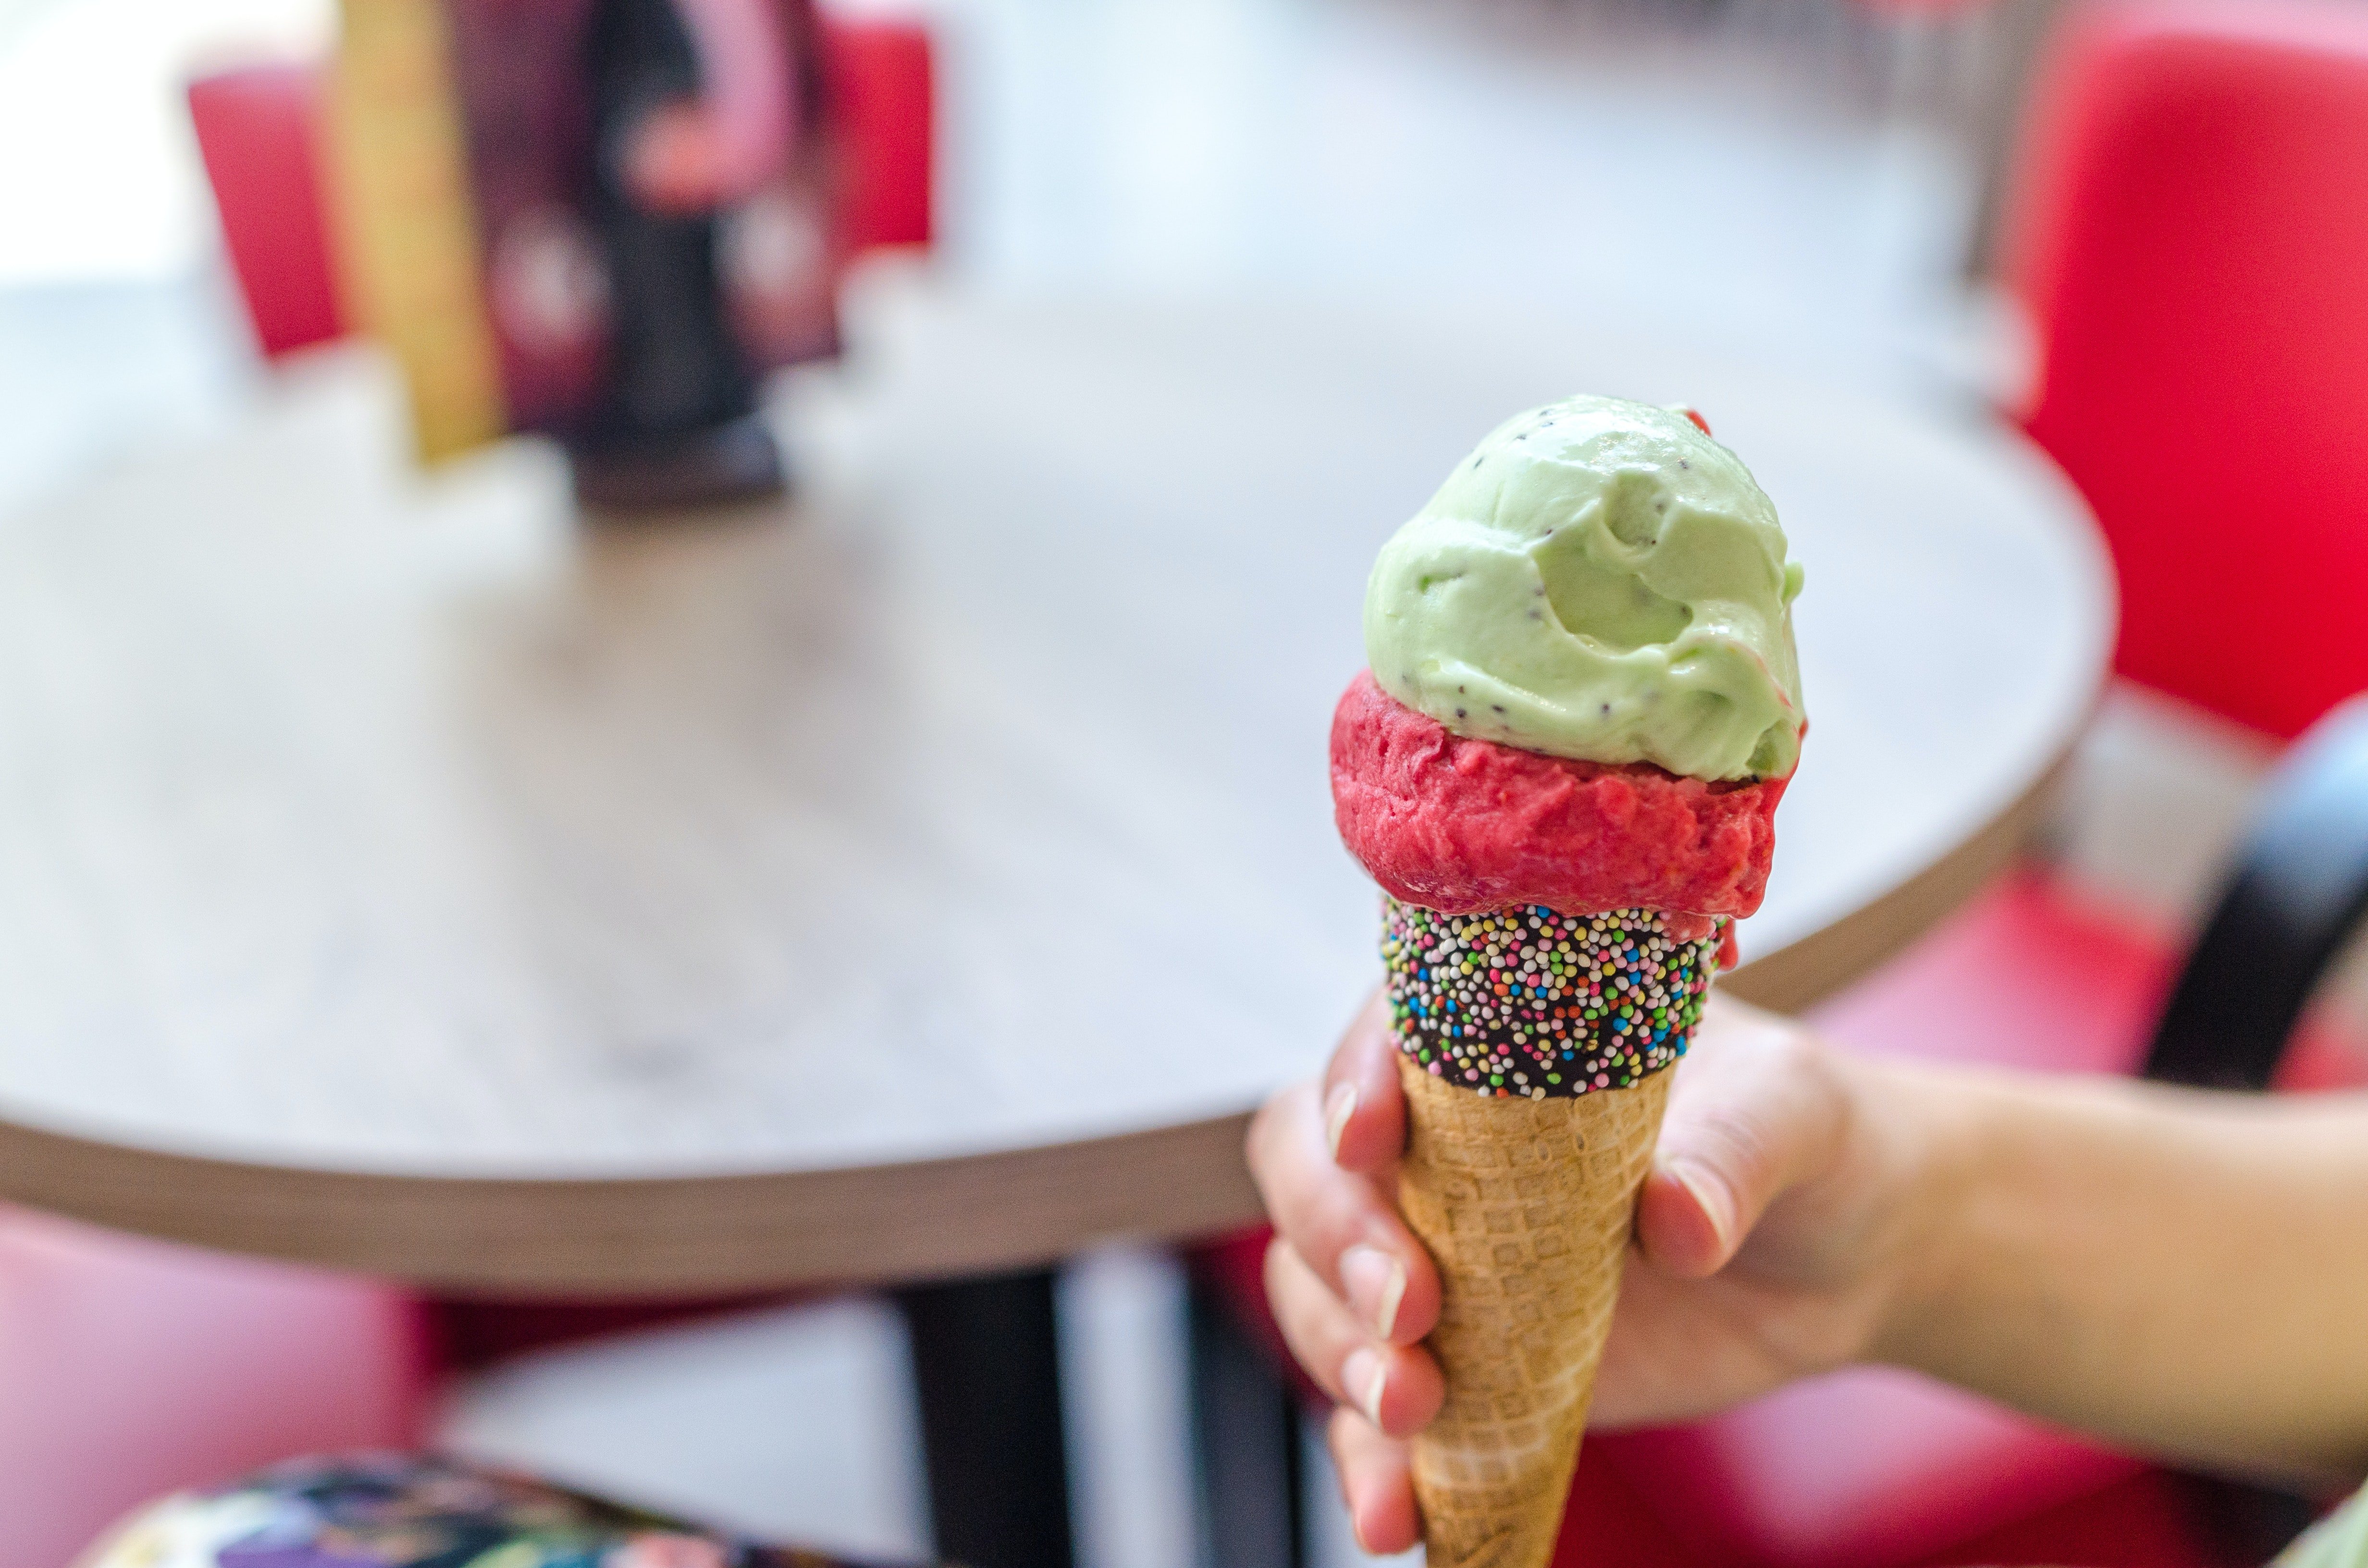 Clive revealed he was allergic to pistachio ice cream. | Source: Pexels